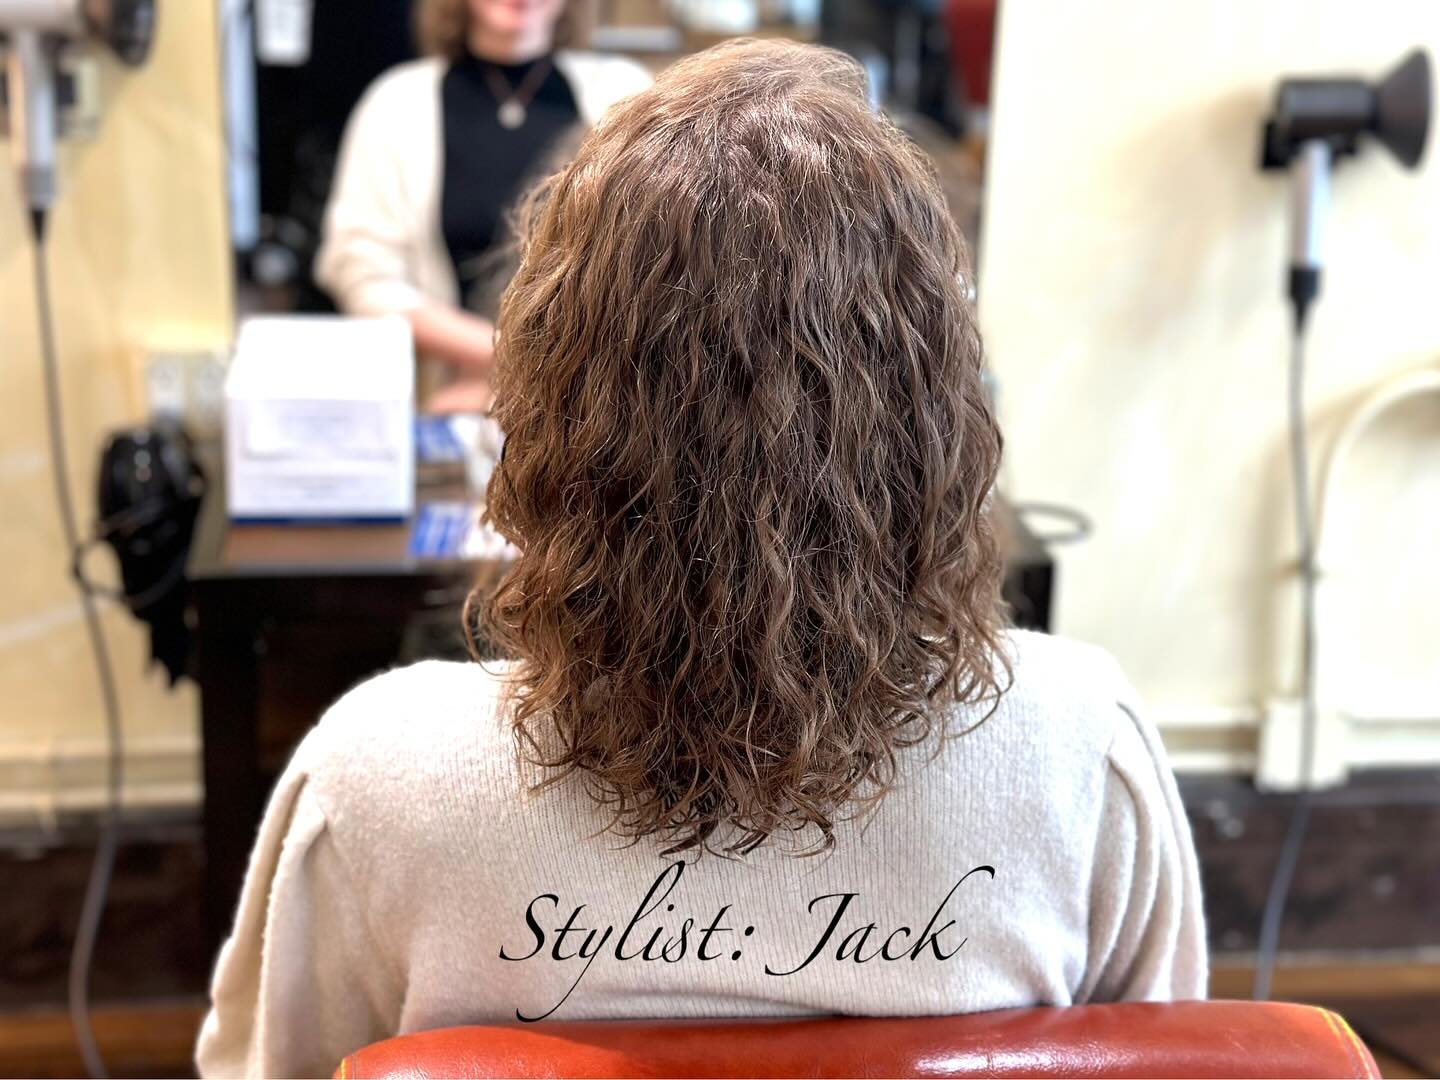 Women&rsquo;s Perm + Cut 
Stylist: Jack

Summer is near ☀️
How about some nice beachy waves 🏖️

We offer: cuts, perms (cold, digital, straightening), coloring, and treatments! 💇🏻&zwj;♀️💇🏻💆🏻&zwj;♂️💆🏼&zwj;♂️✂️

Looking forward to seeing you so